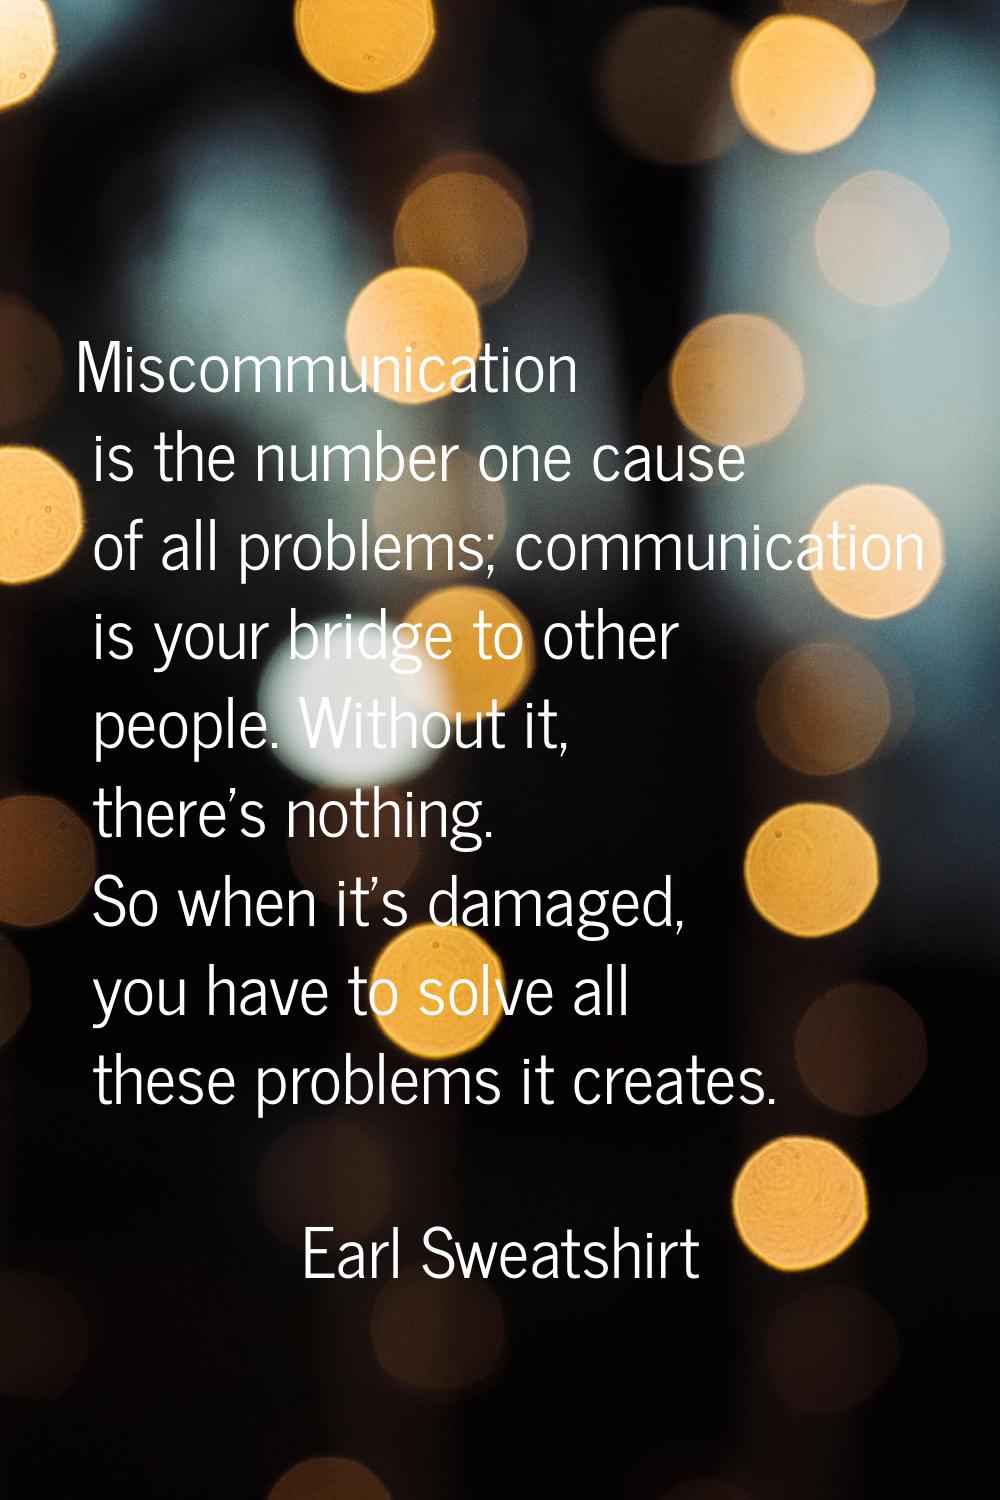 Miscommunication is the number one cause of all problems; communication is your bridge to other peo